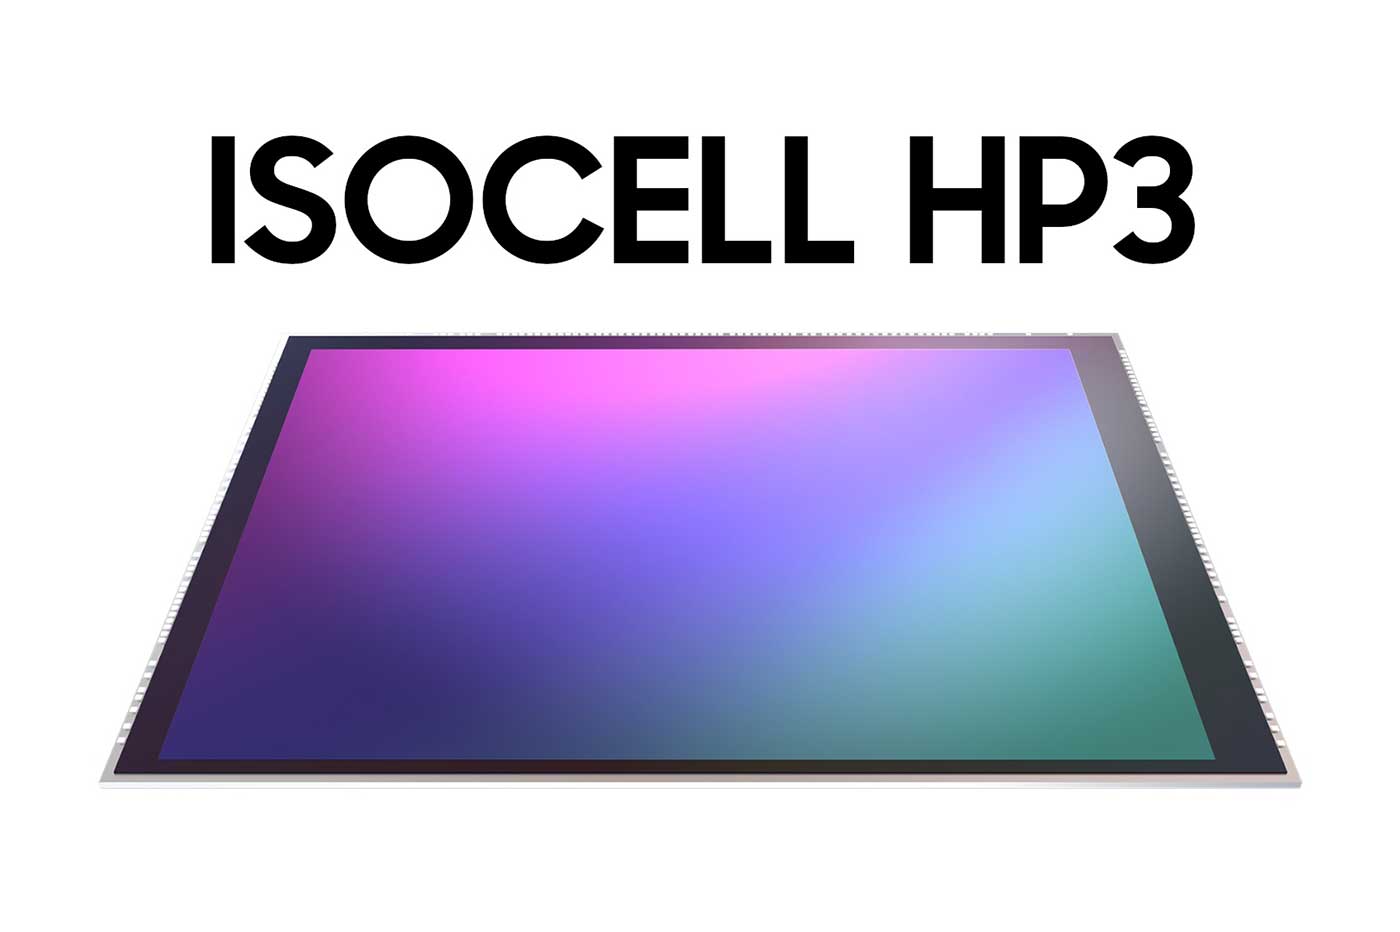 Samsung Isocell HP3